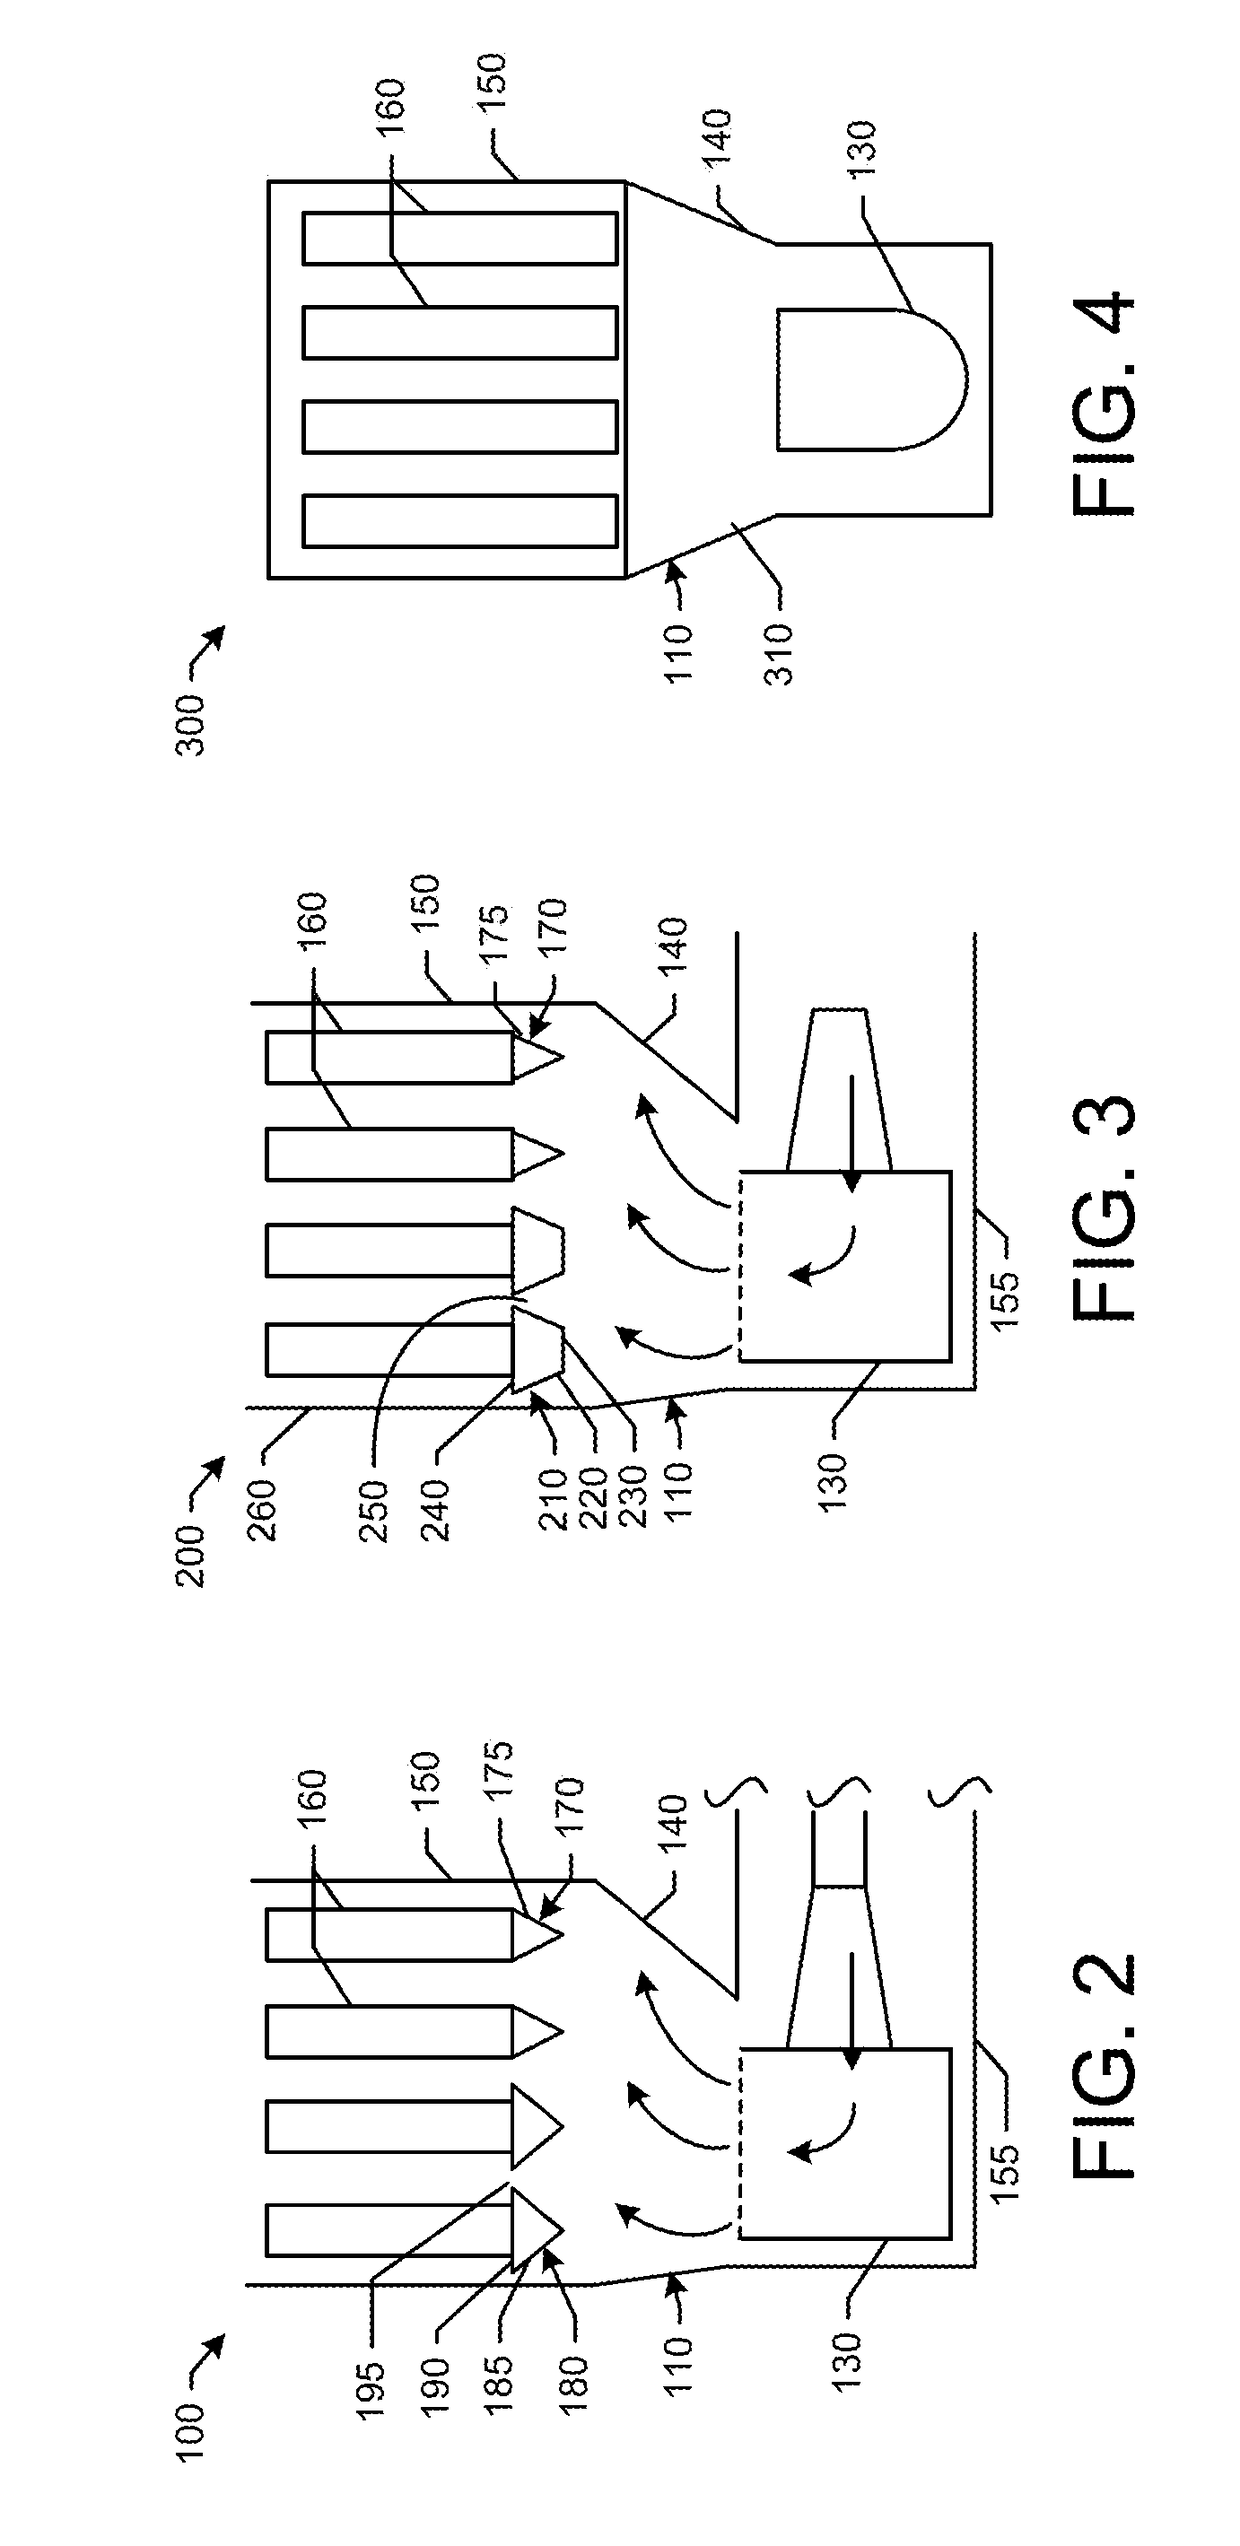 Protective baffles for gas turbine noise attenuation system